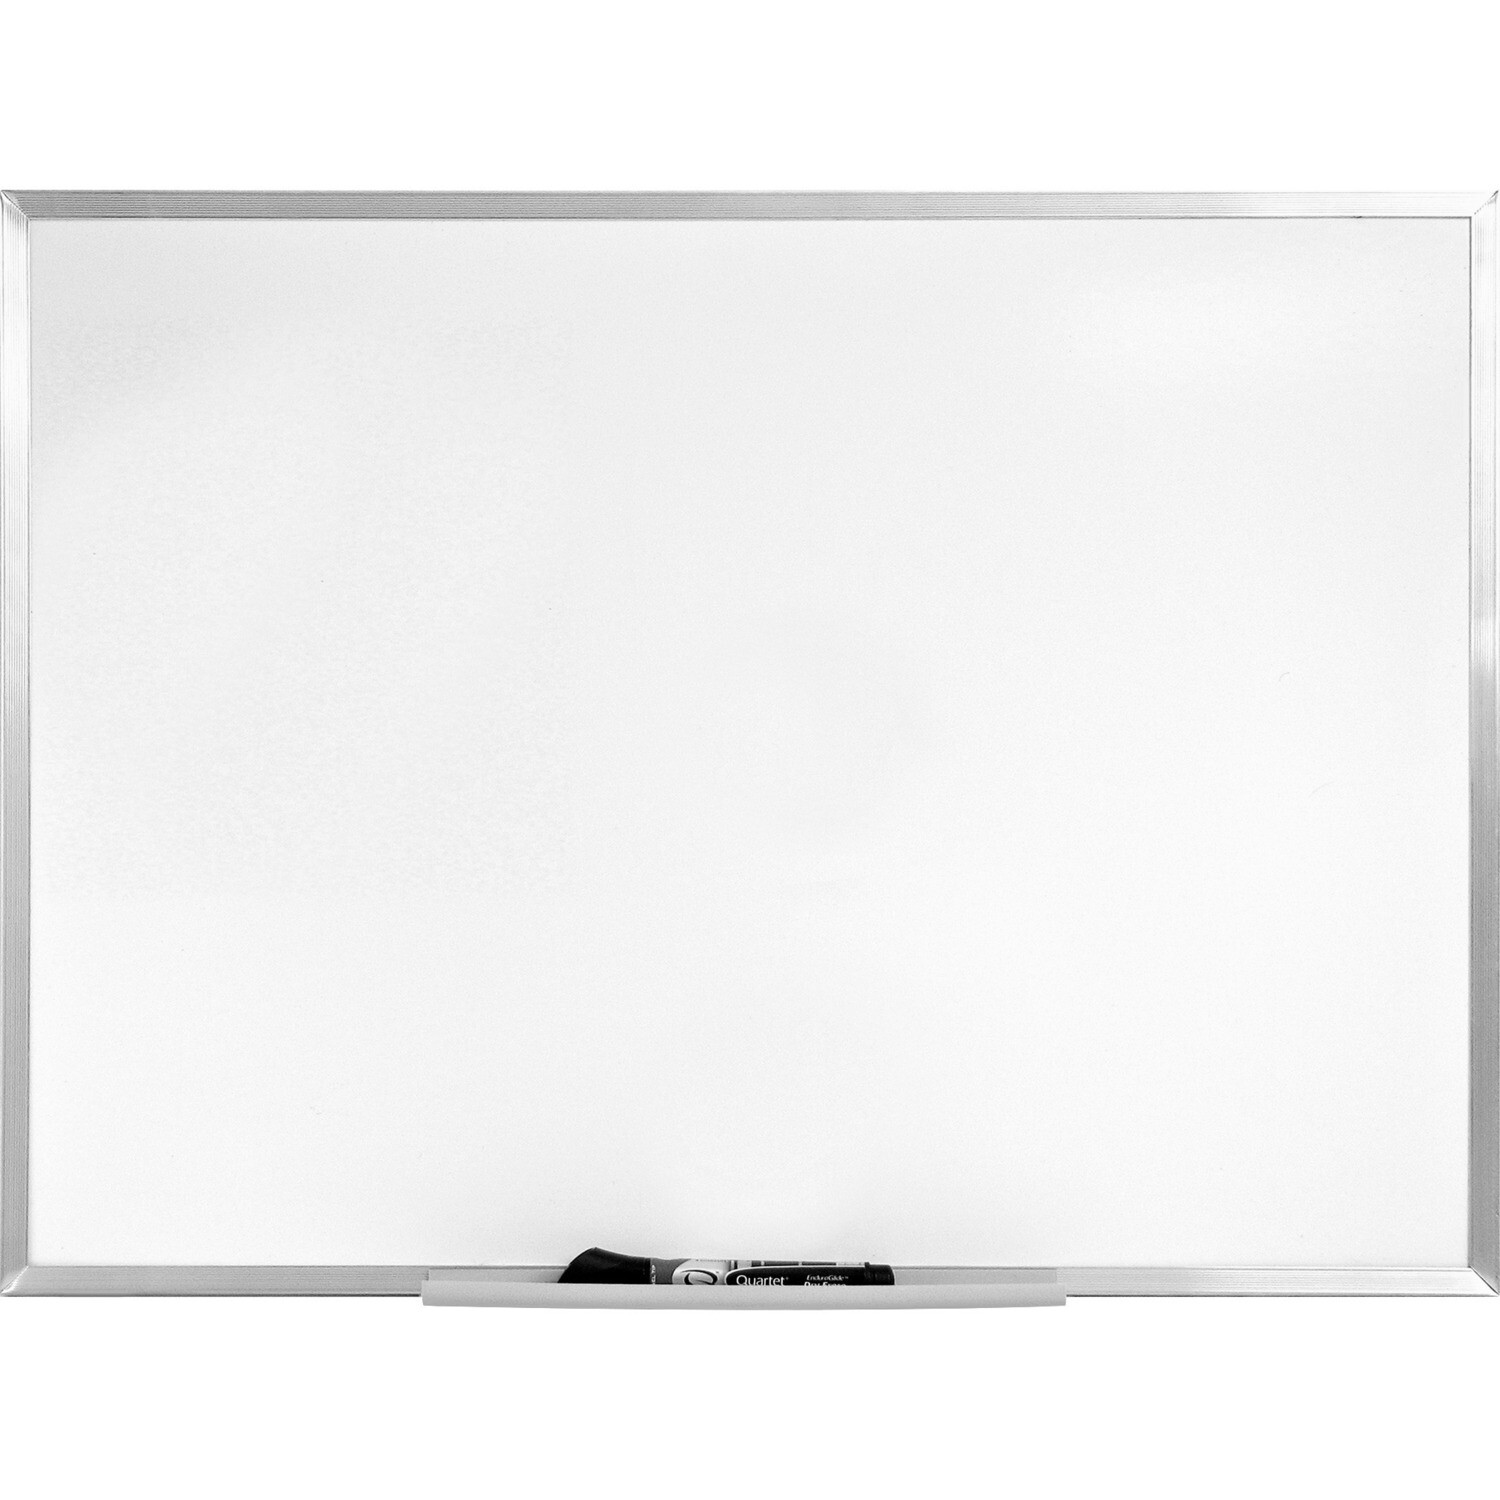 Whiteboard, 36" x 48" With Tray, Webco